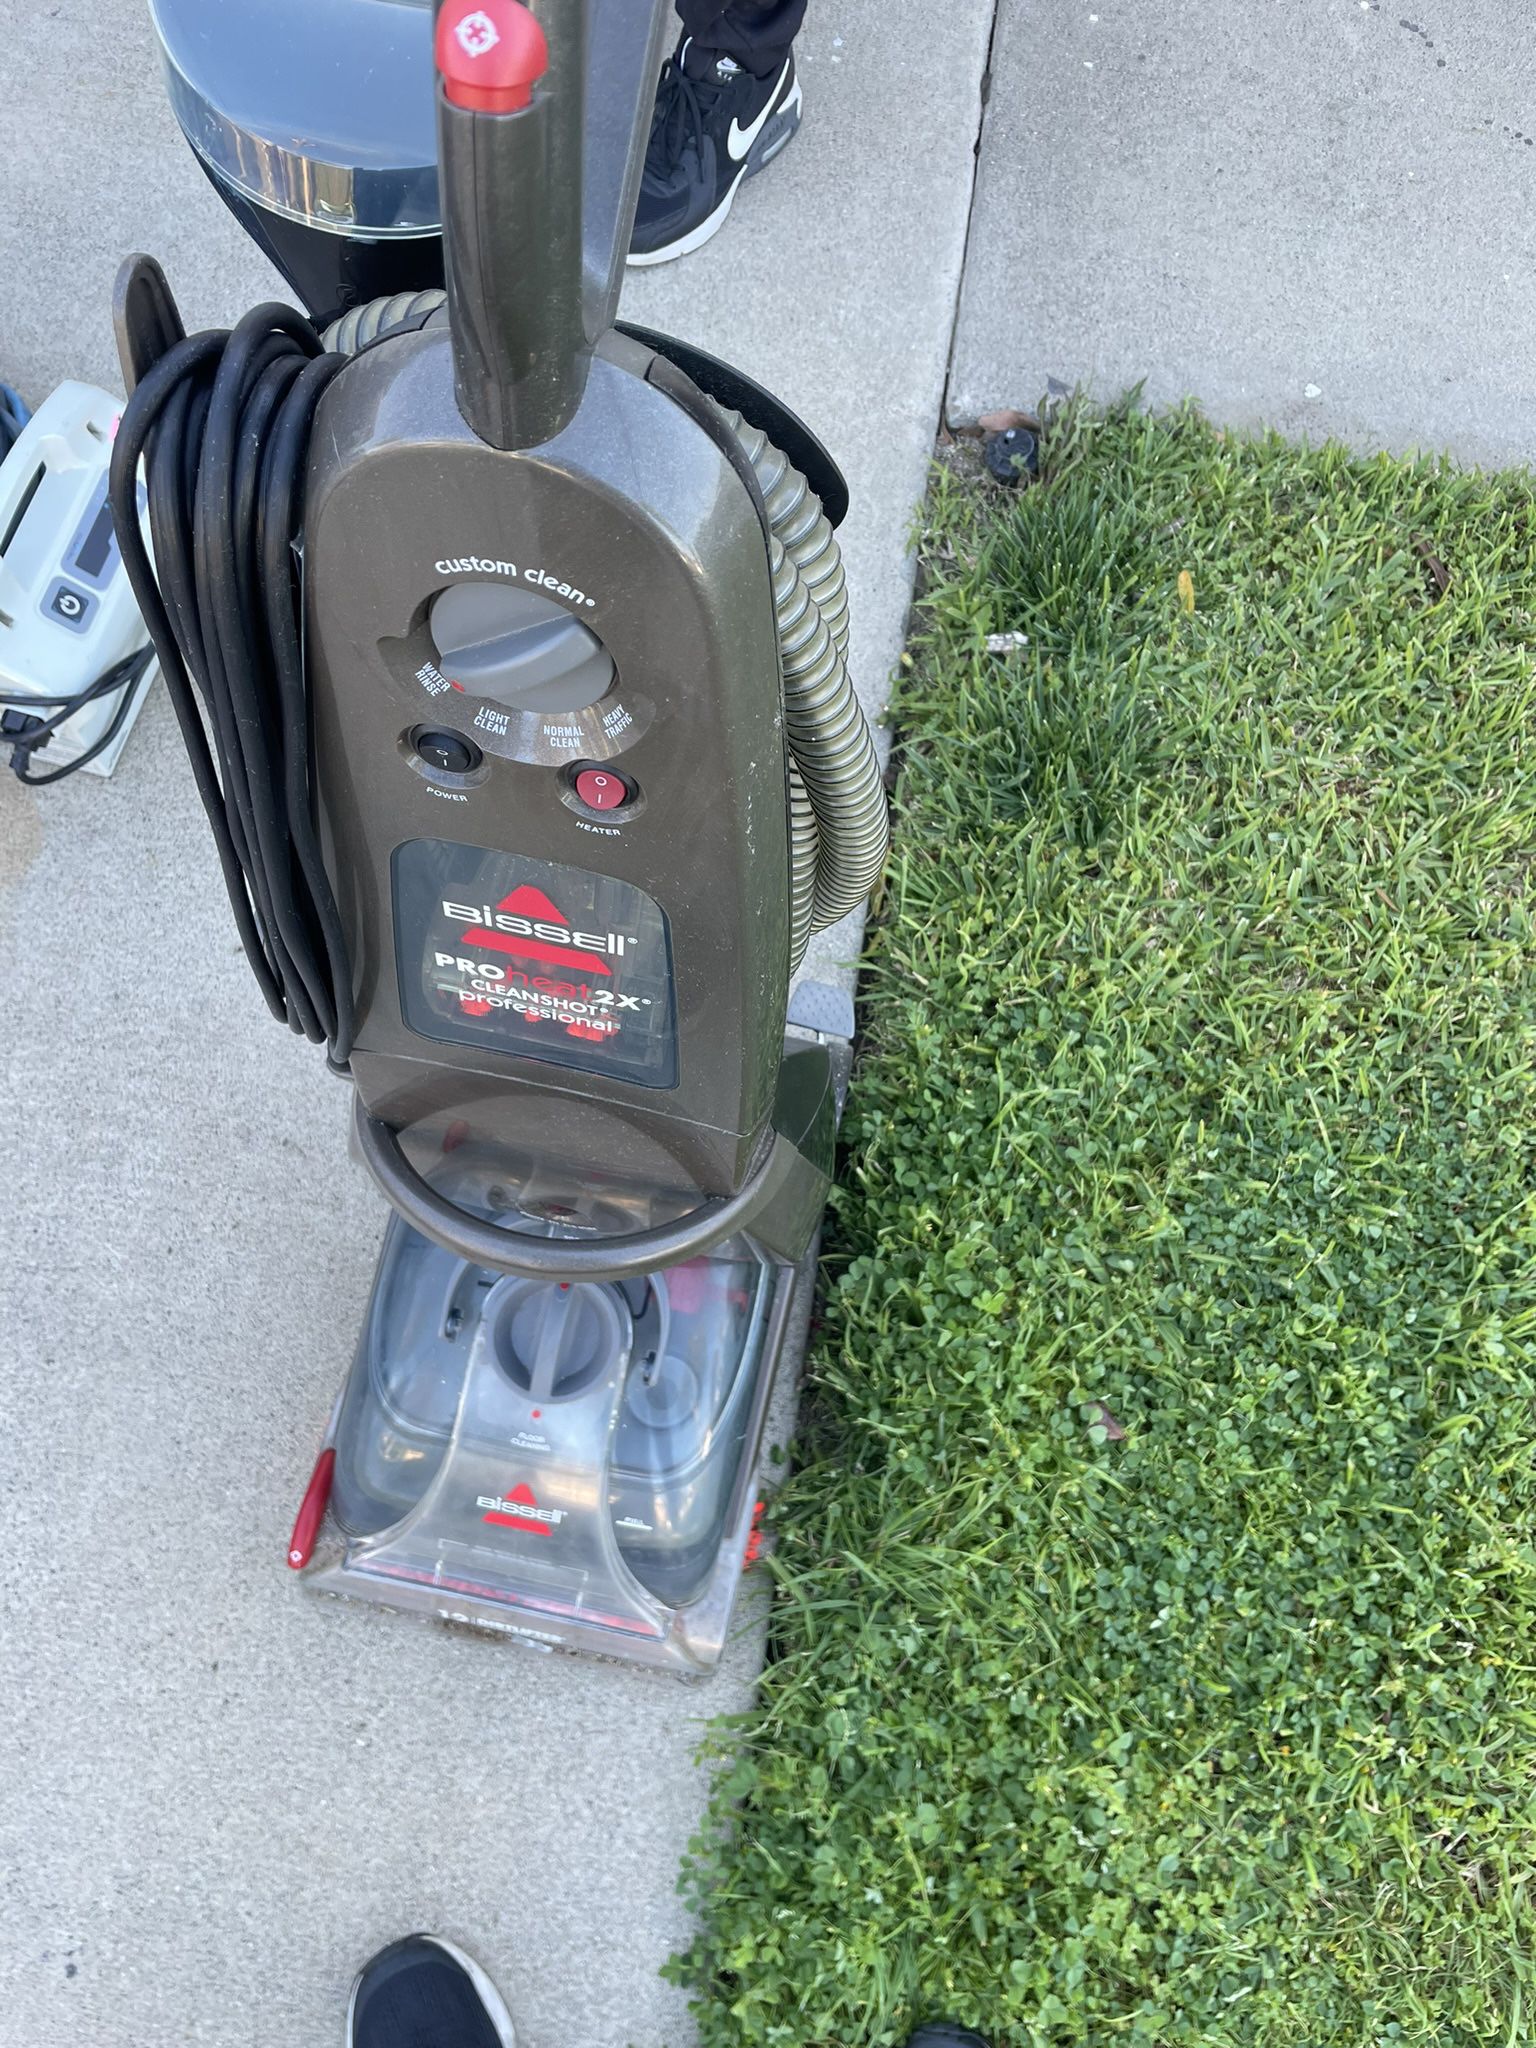 bissell proheat 2x professional carpet cleaner 